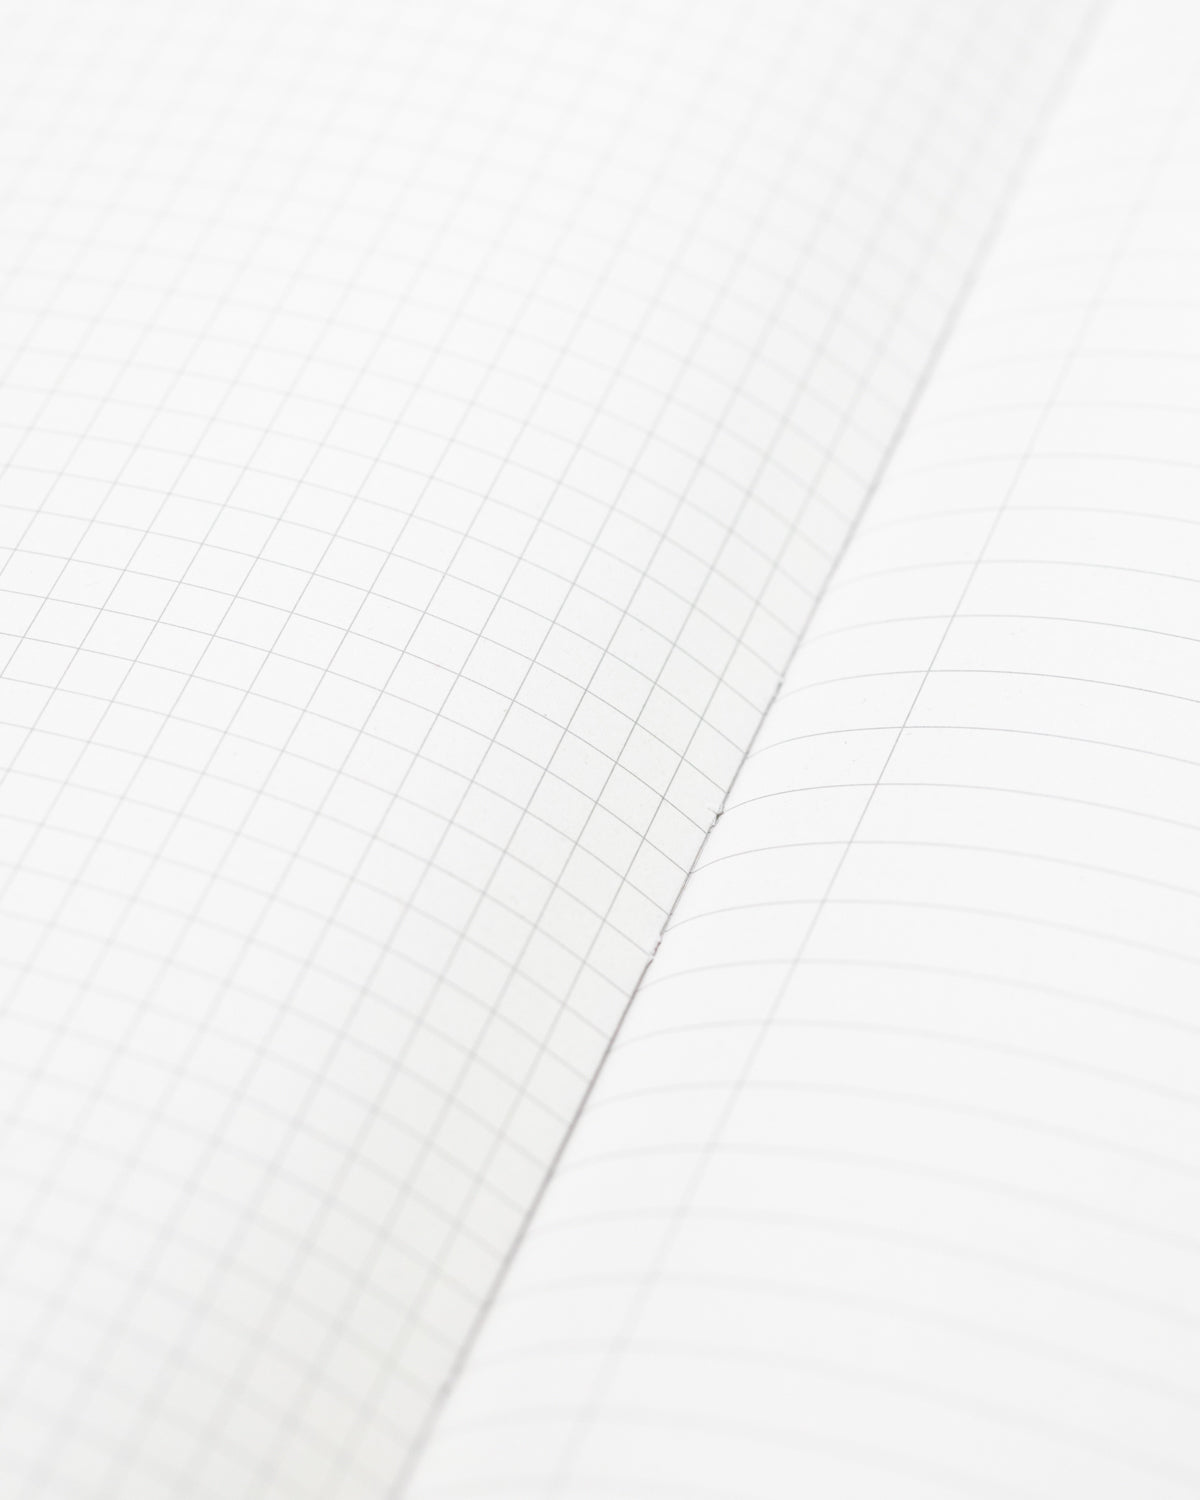 Cardiology Hardcover - Lined/Grid